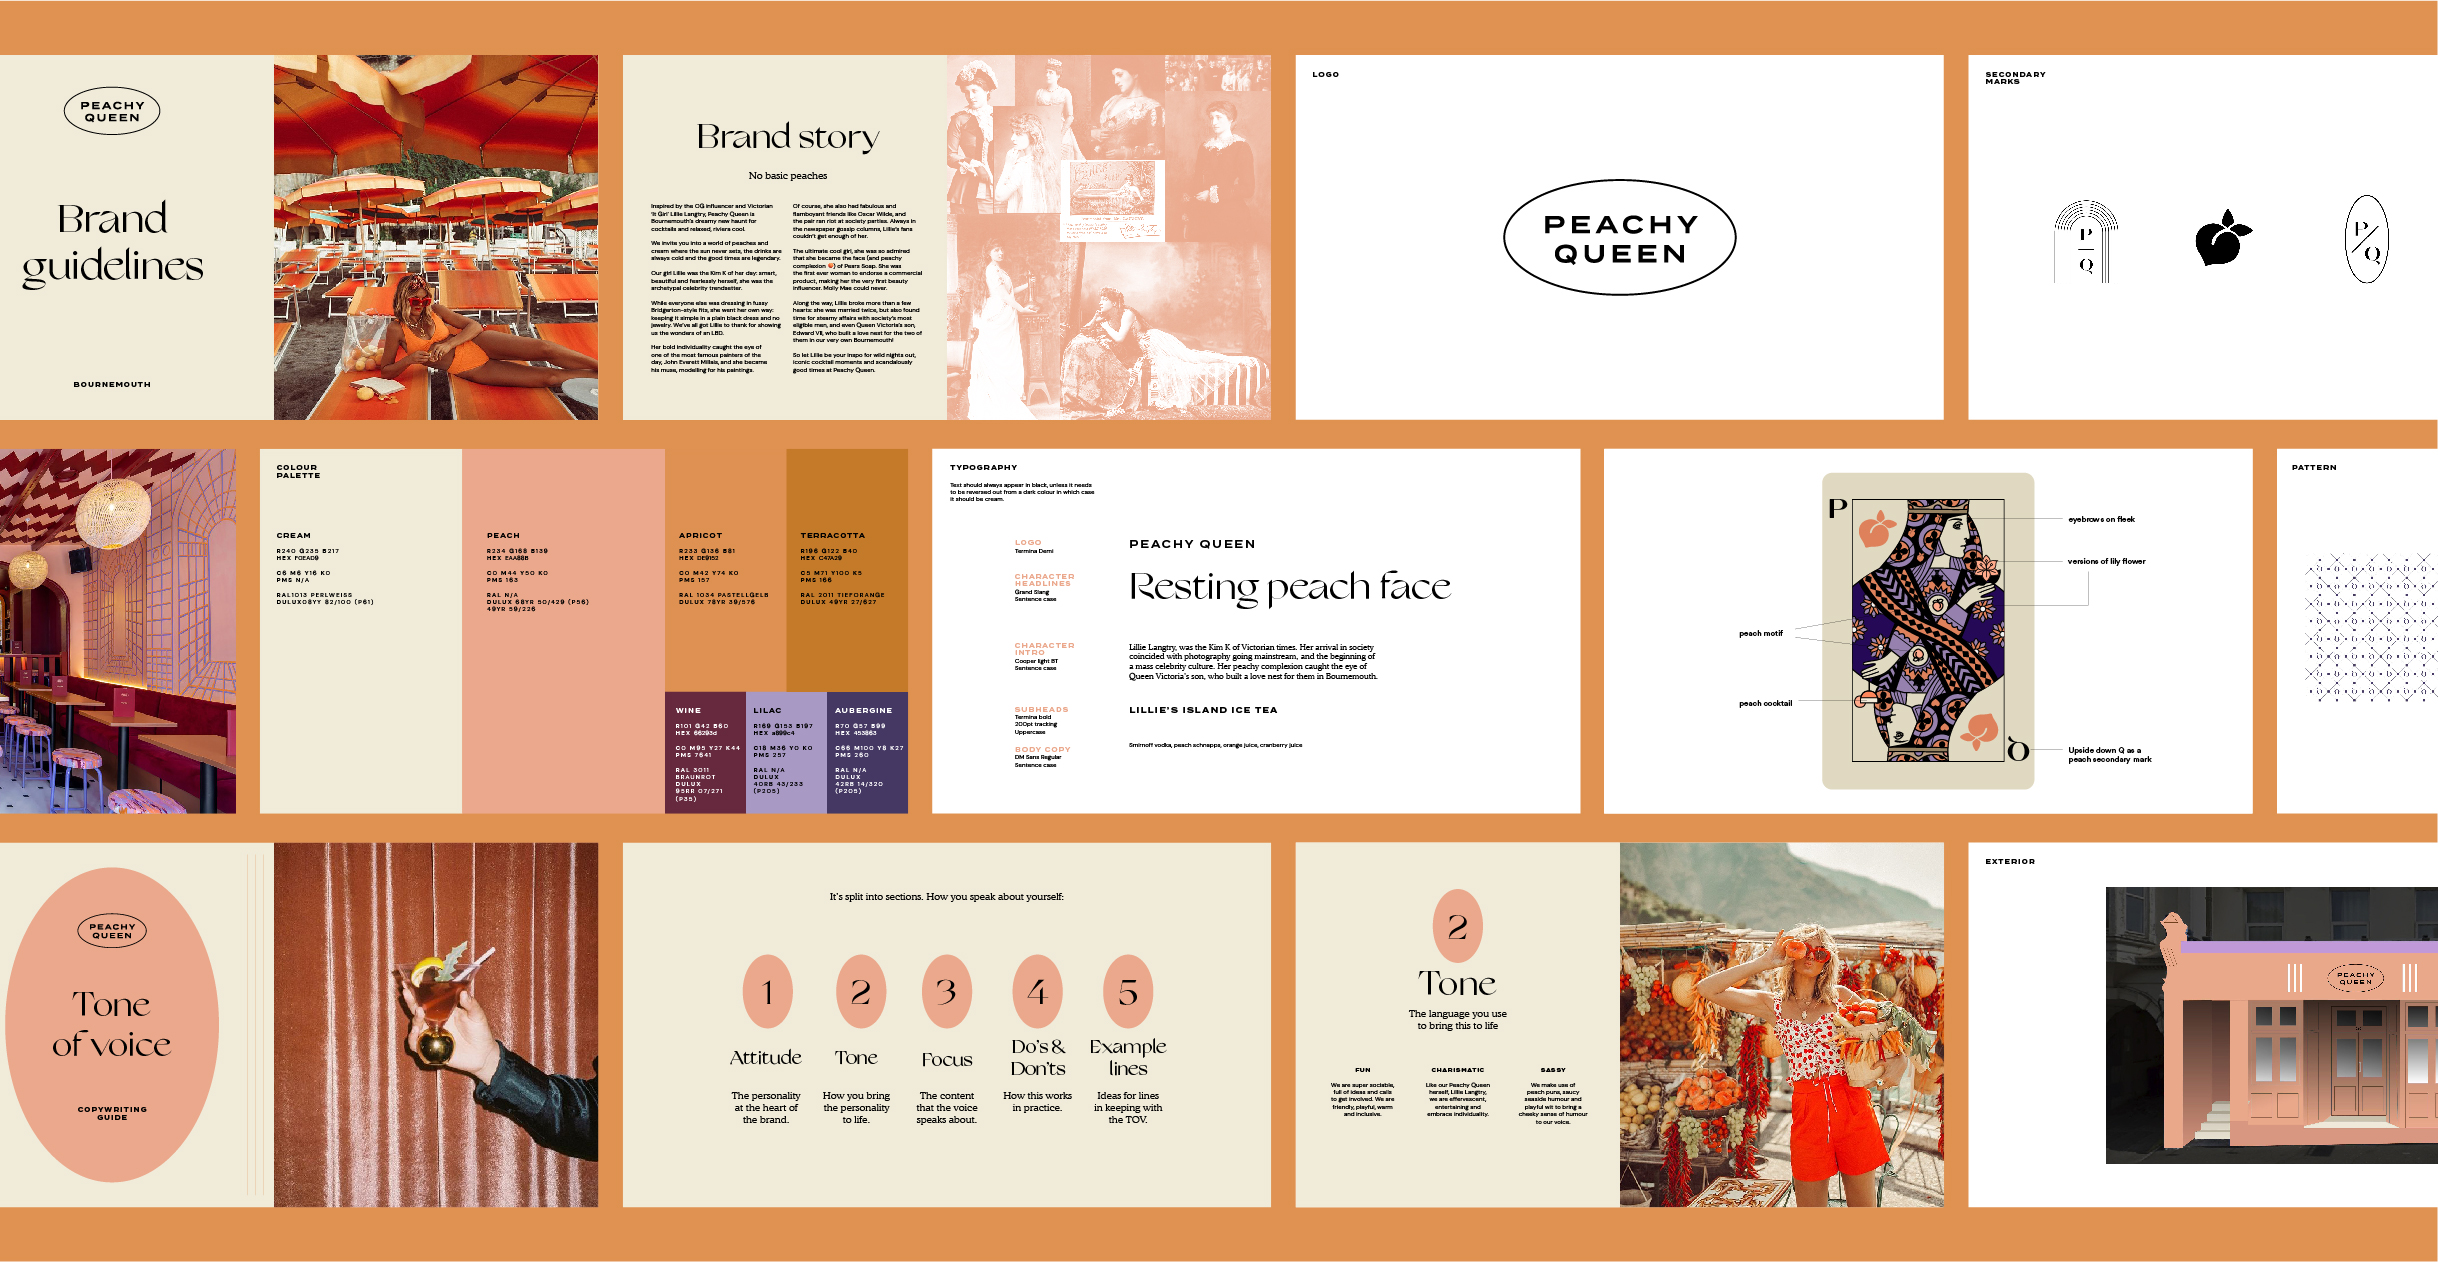 Peachy Queen brand guidelines